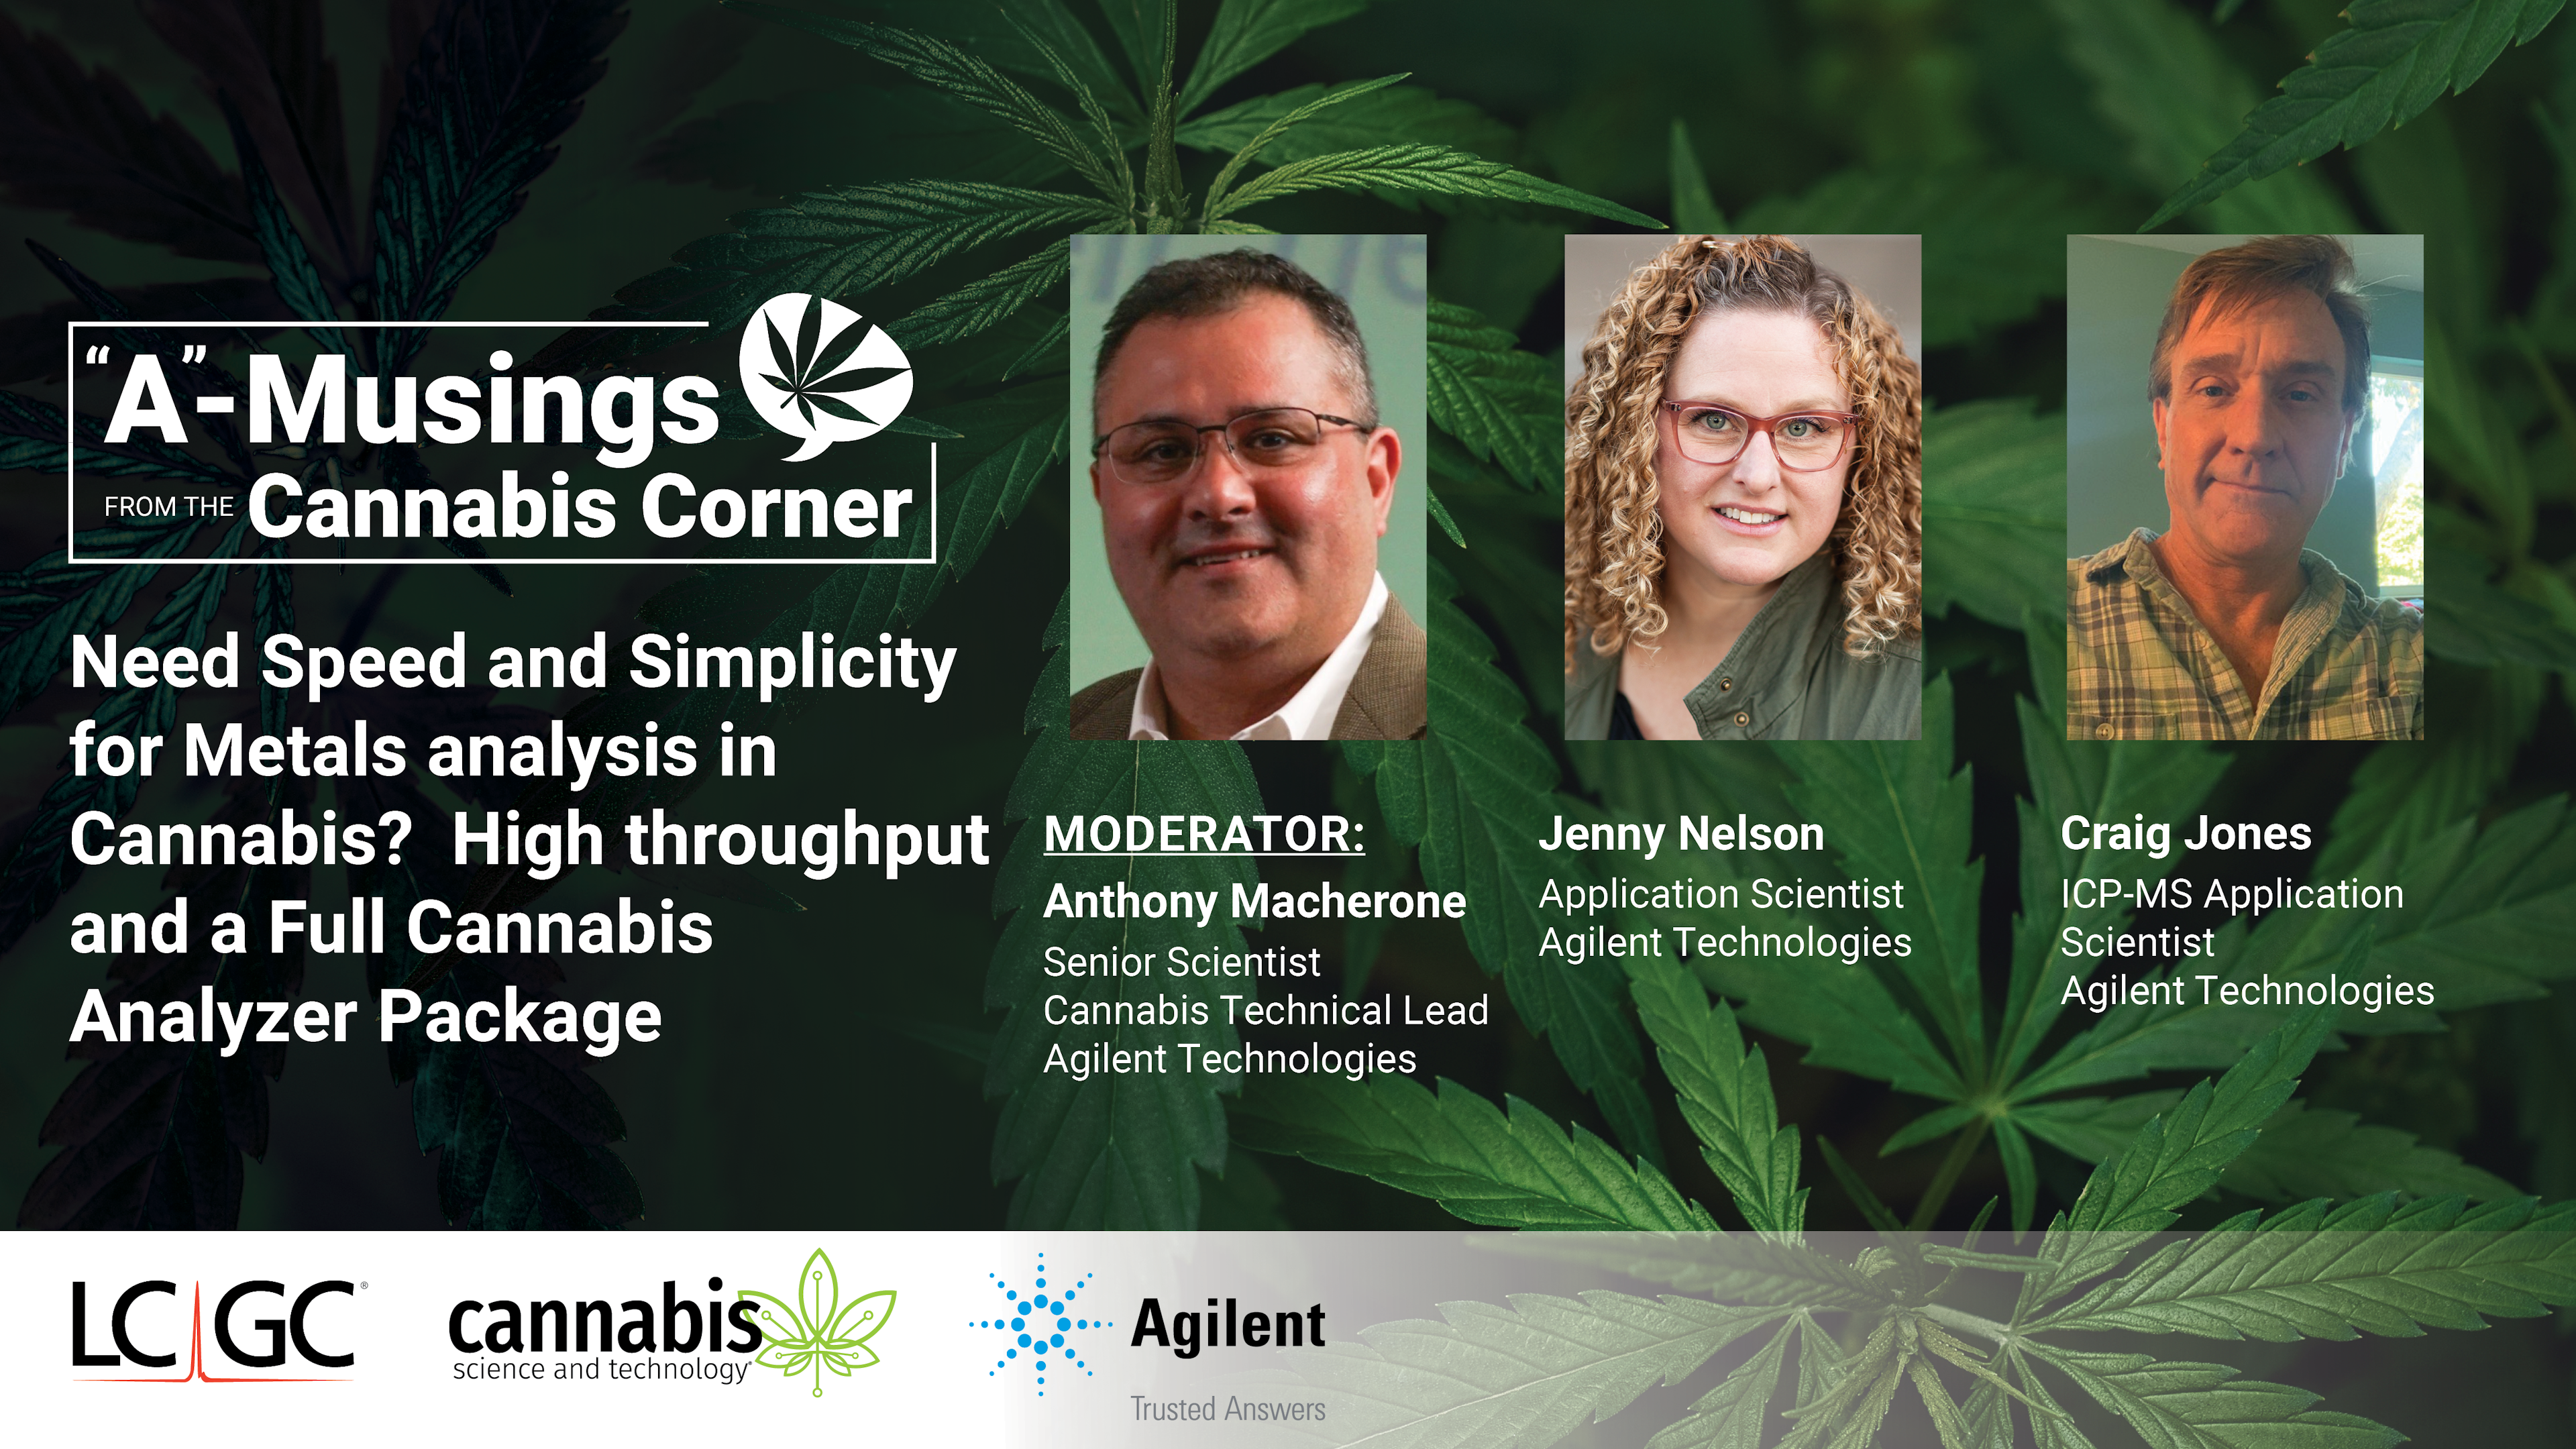 Need Speed and Simplicity for Metals Analysis in Cannabis? High Throughput and a Full Cannabis Analyzer Package